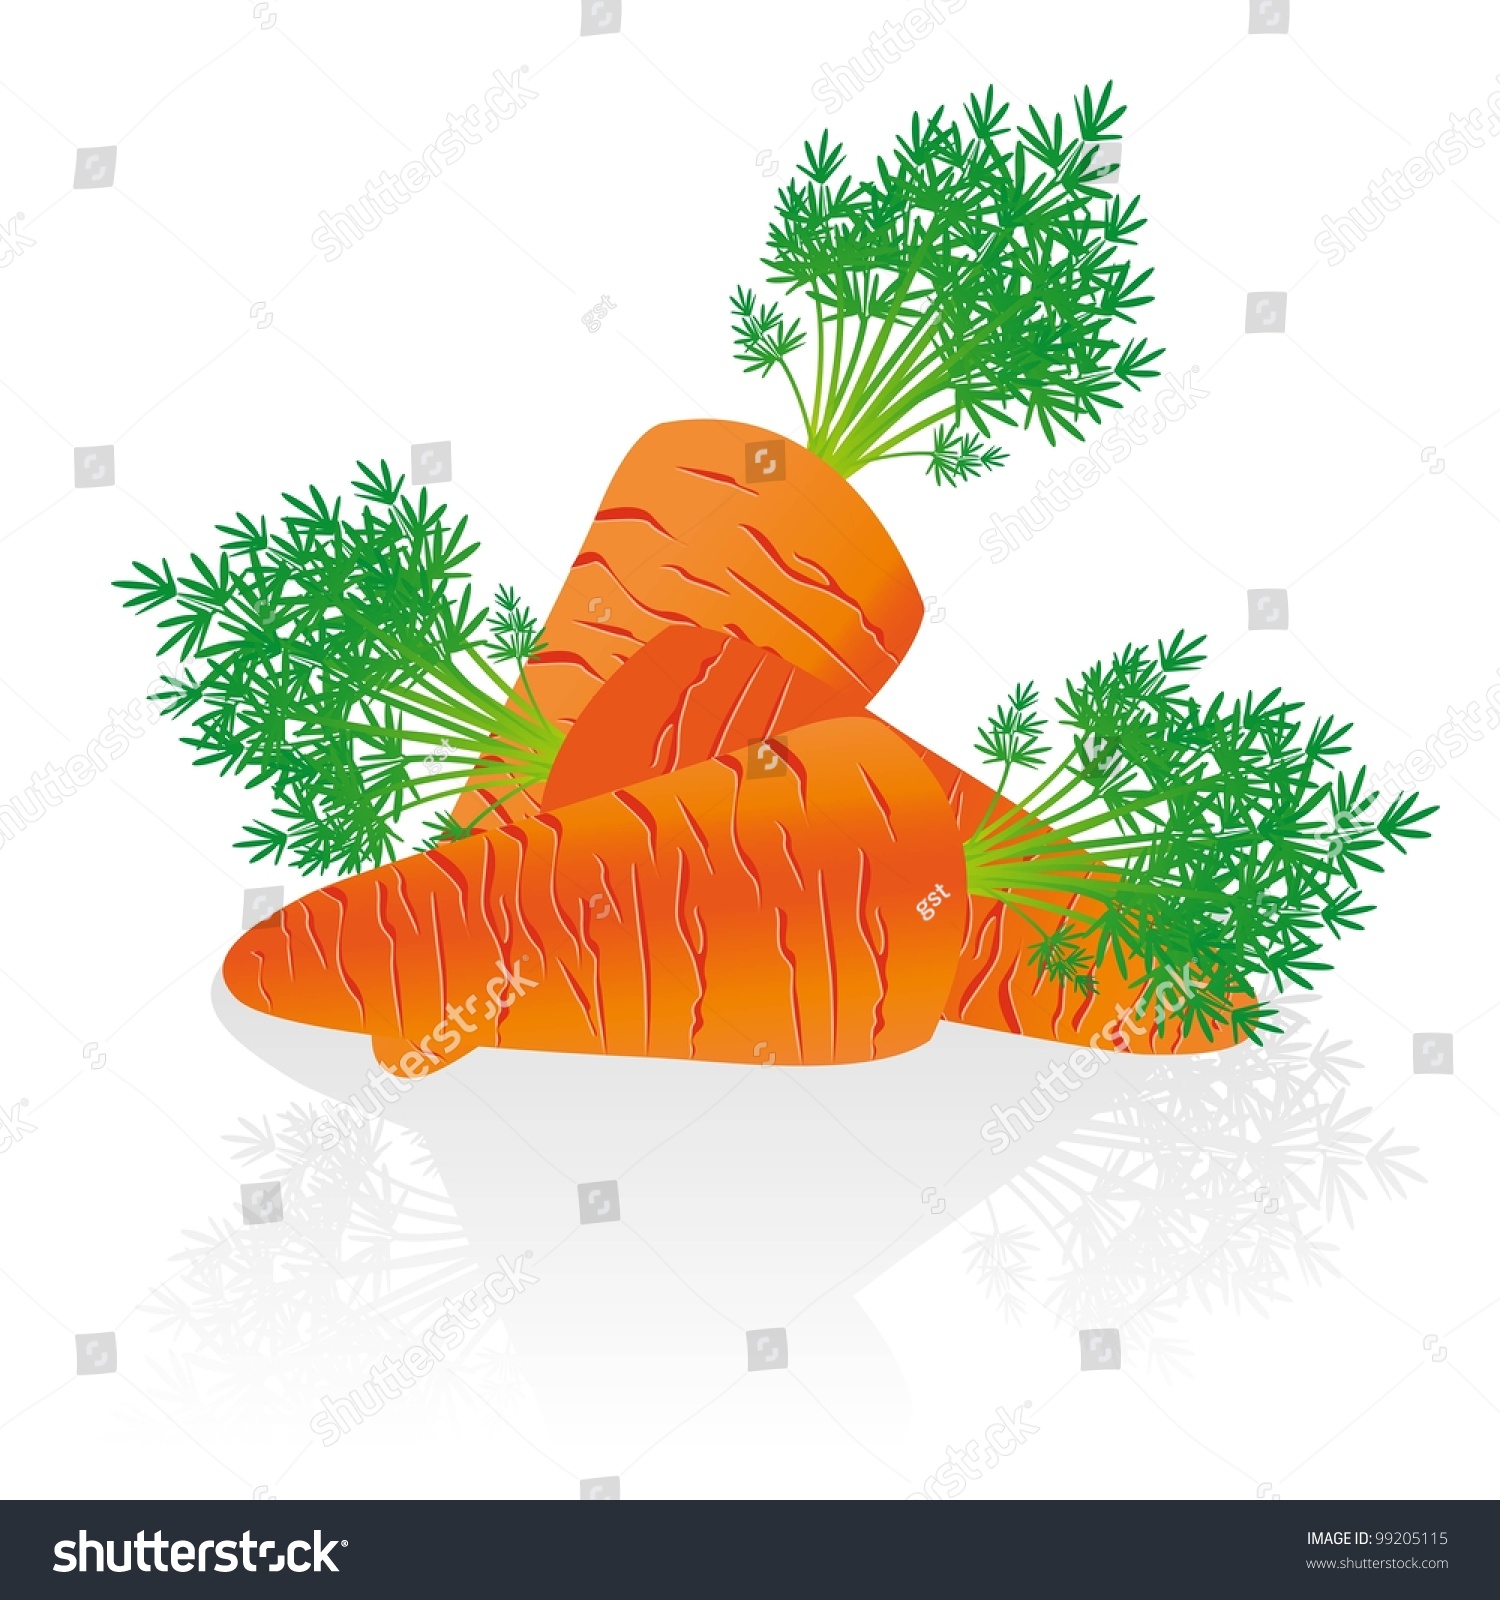 Group Carrots Isolated Over White Background Stock Photo (Photo ...